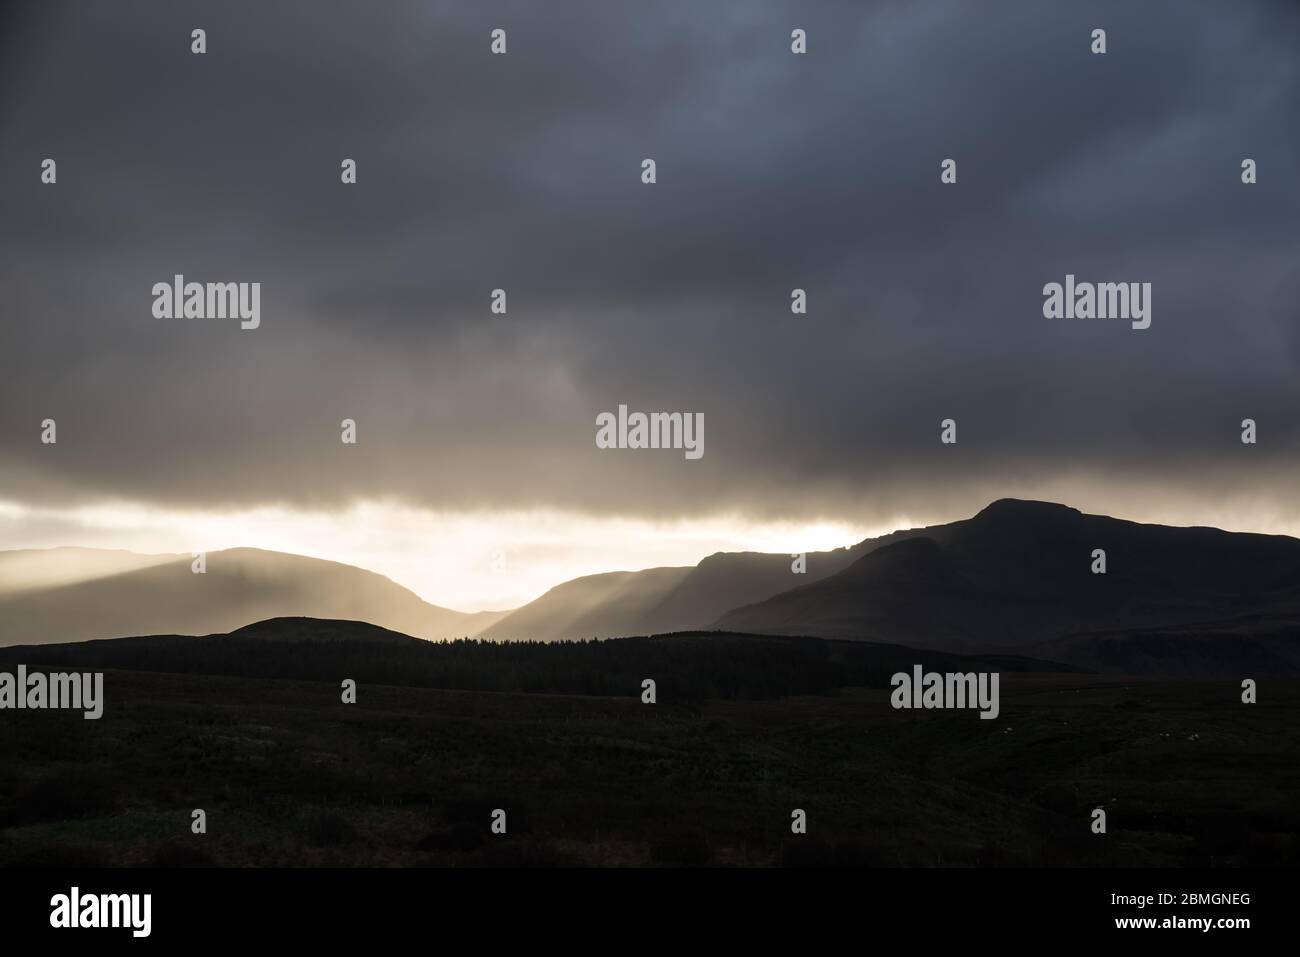 The sun sets behind the hills, blazing through a break in the clouds. Stock Photo